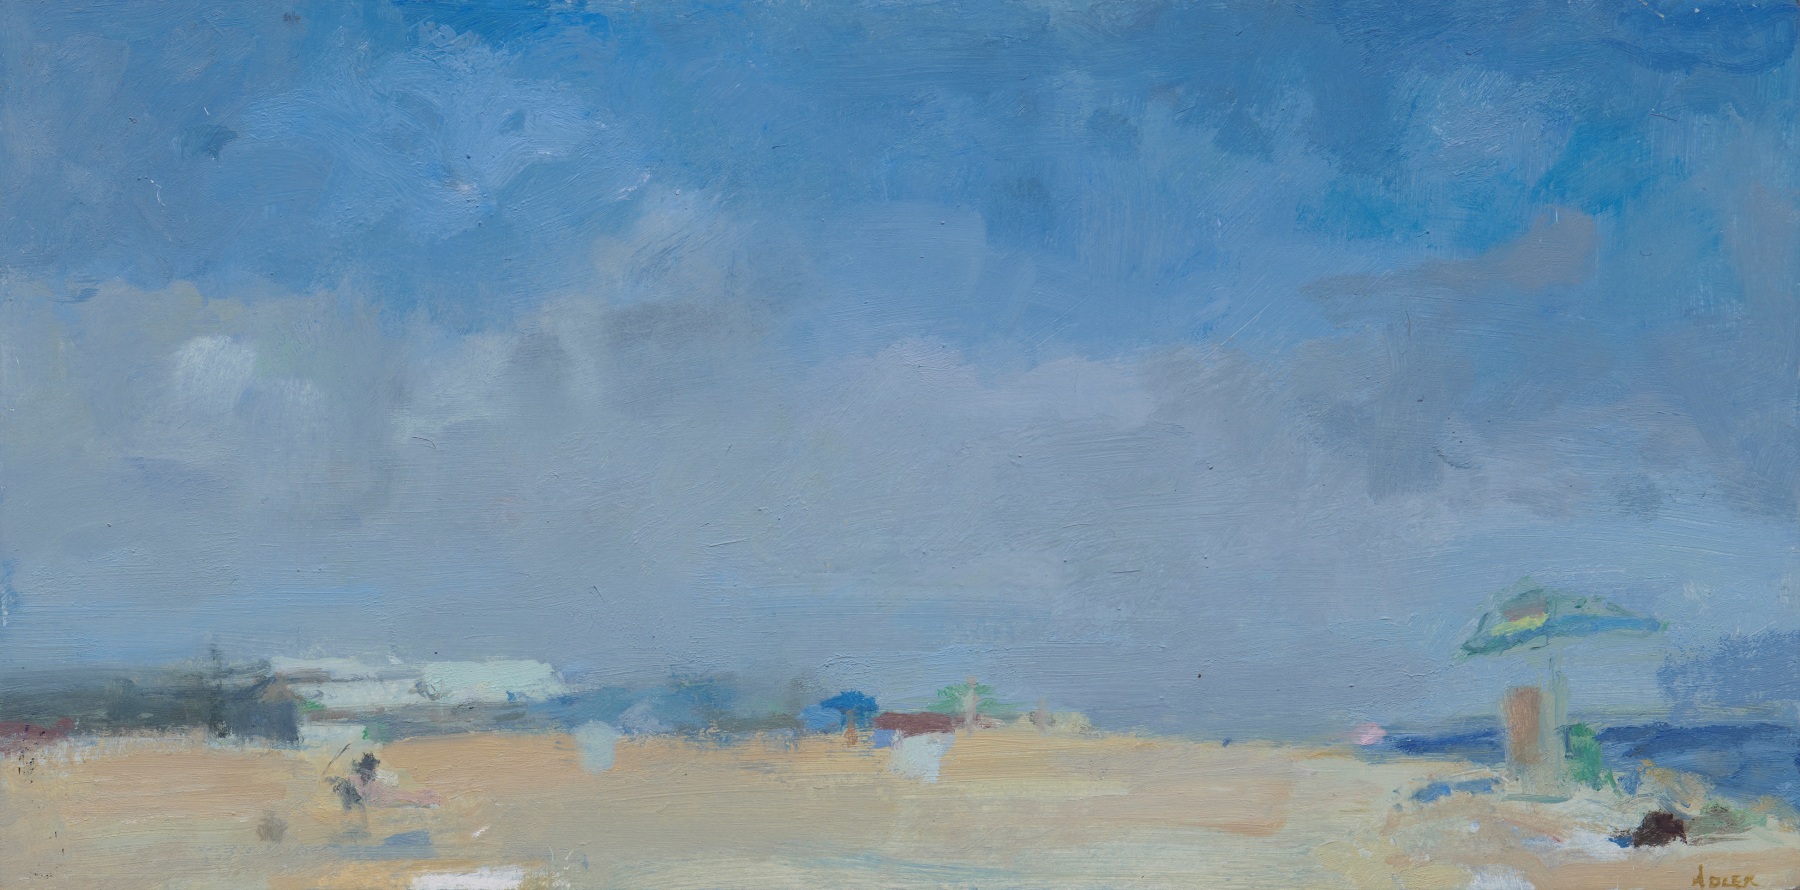 Laura Adler

&amp;quot;Beach with Light Breeze,&amp;quot; 2019

oil on panel

6 x 12 in.